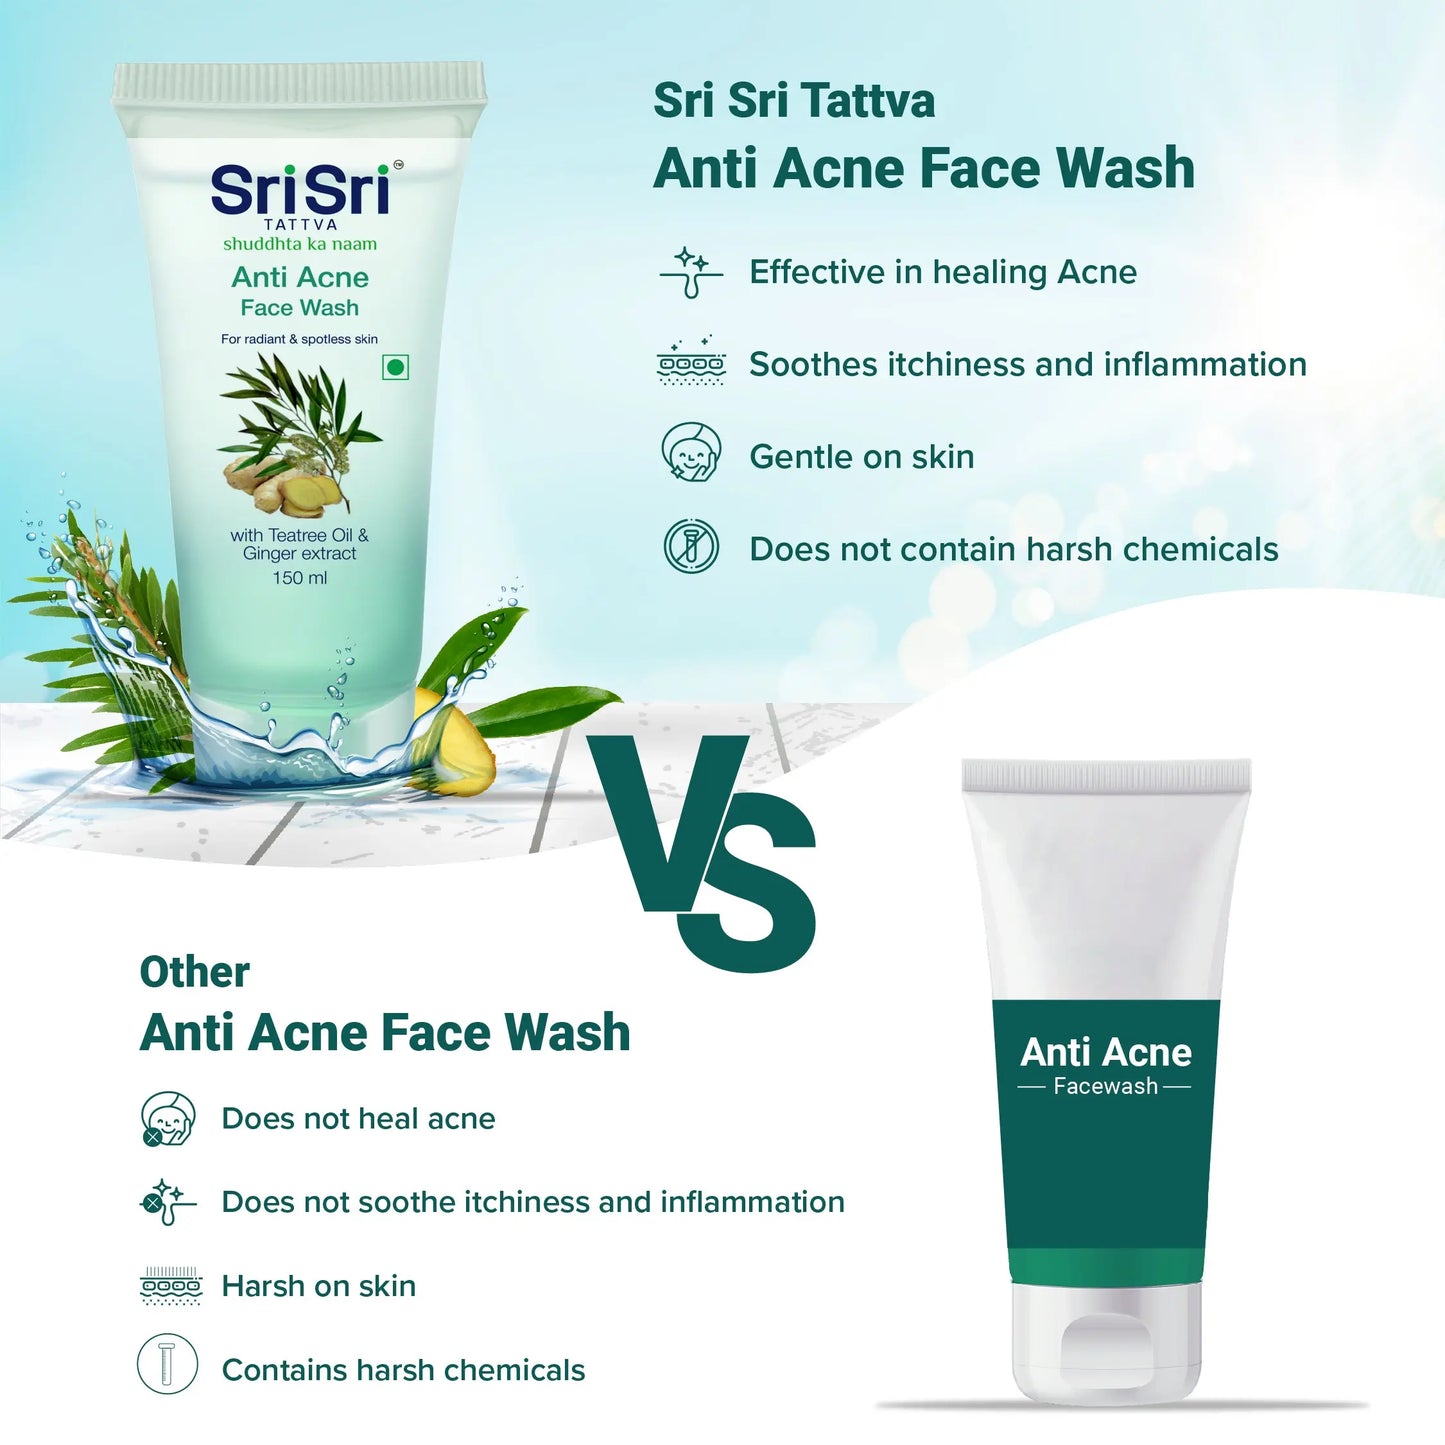 Anti Acne Face Wash - For Radiant & Spotless Skin, 150 ml